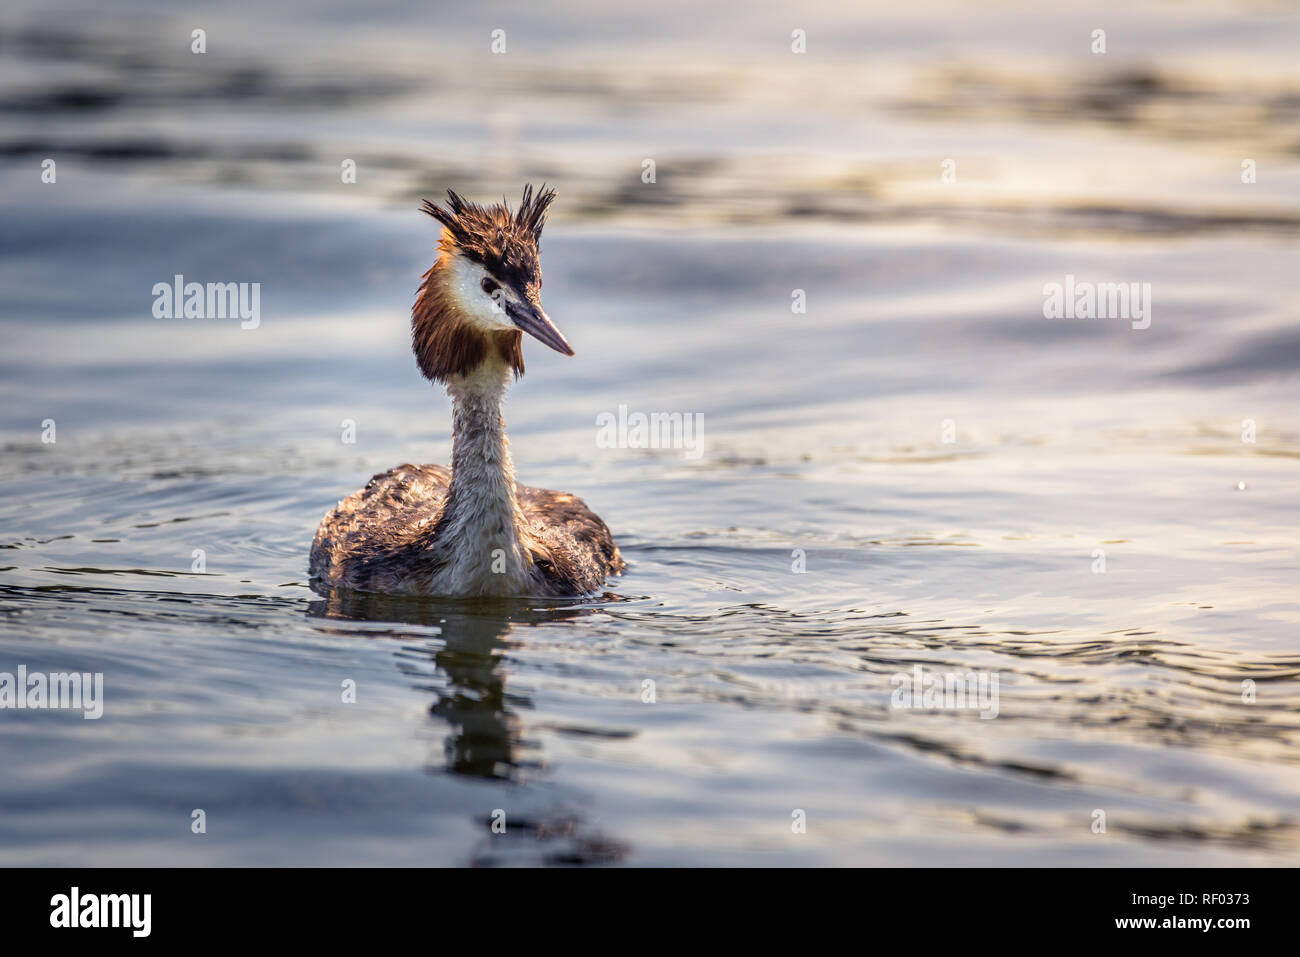 A great crested grebe (podiceps cristatus) is swimming on the water surface, looking interested and still wet from the last dive. Stock Photo